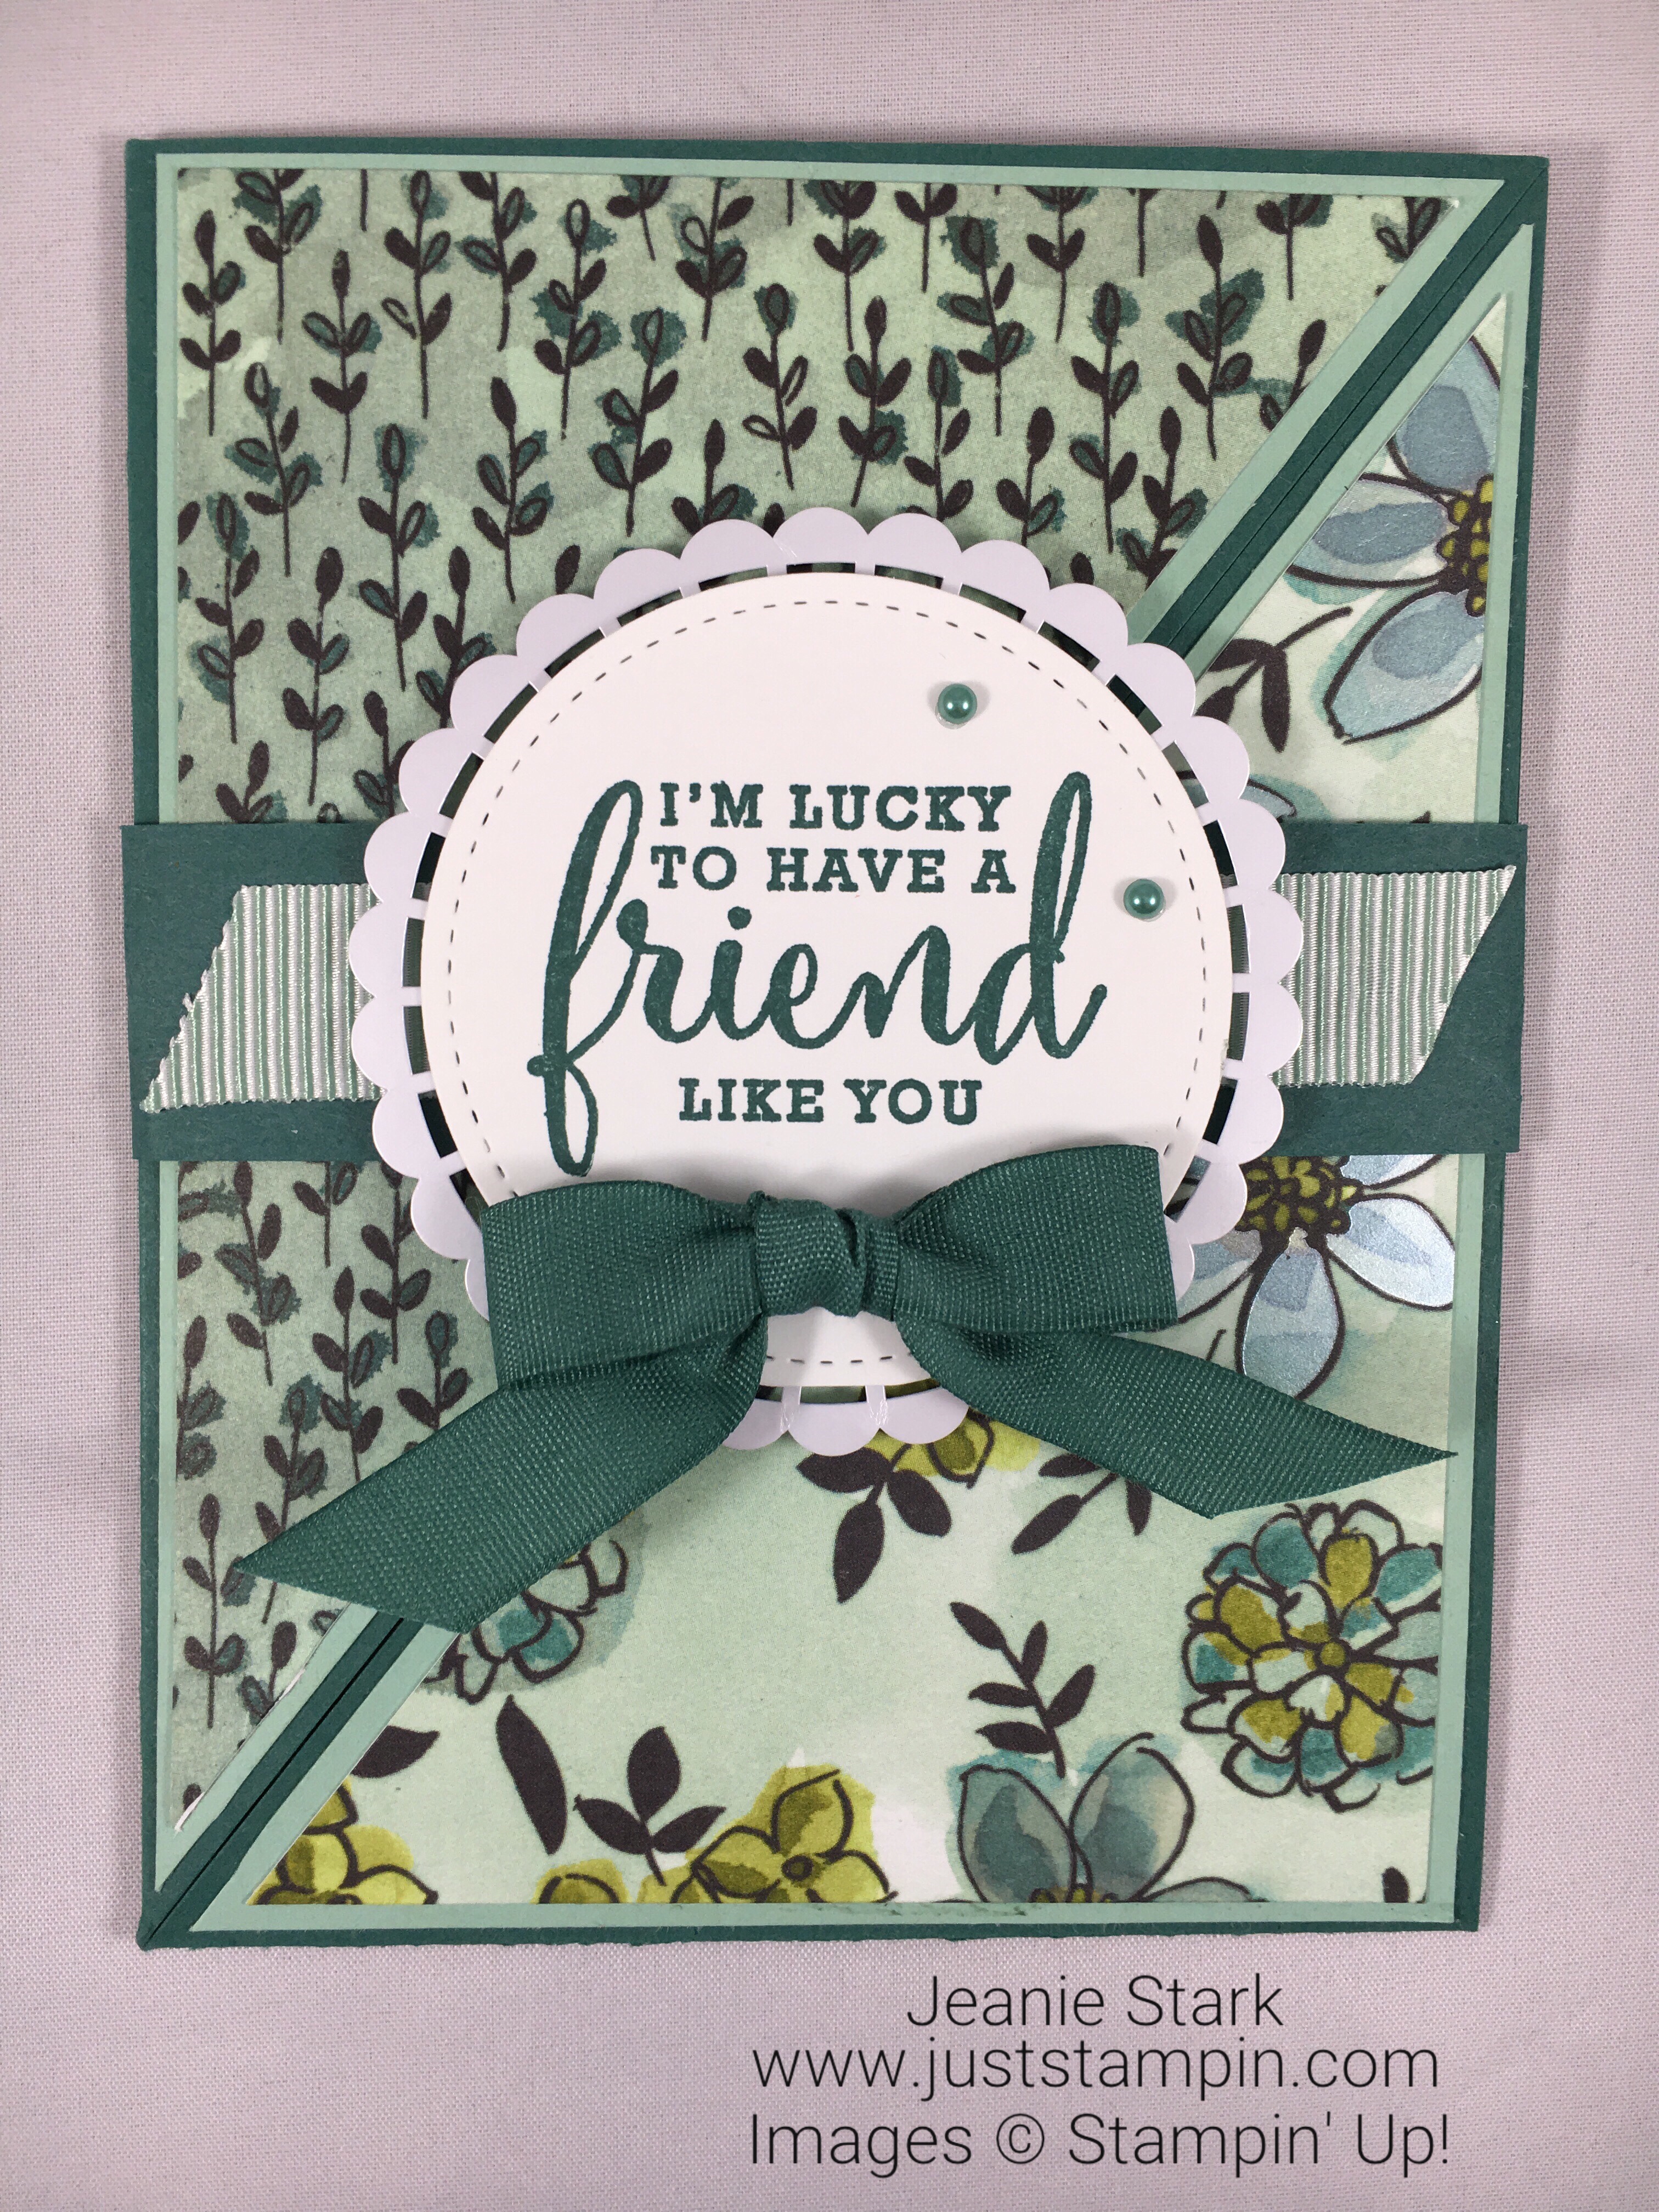 Stampin Up Share What You Love friend card idea - Jeanie Stark StampinUp